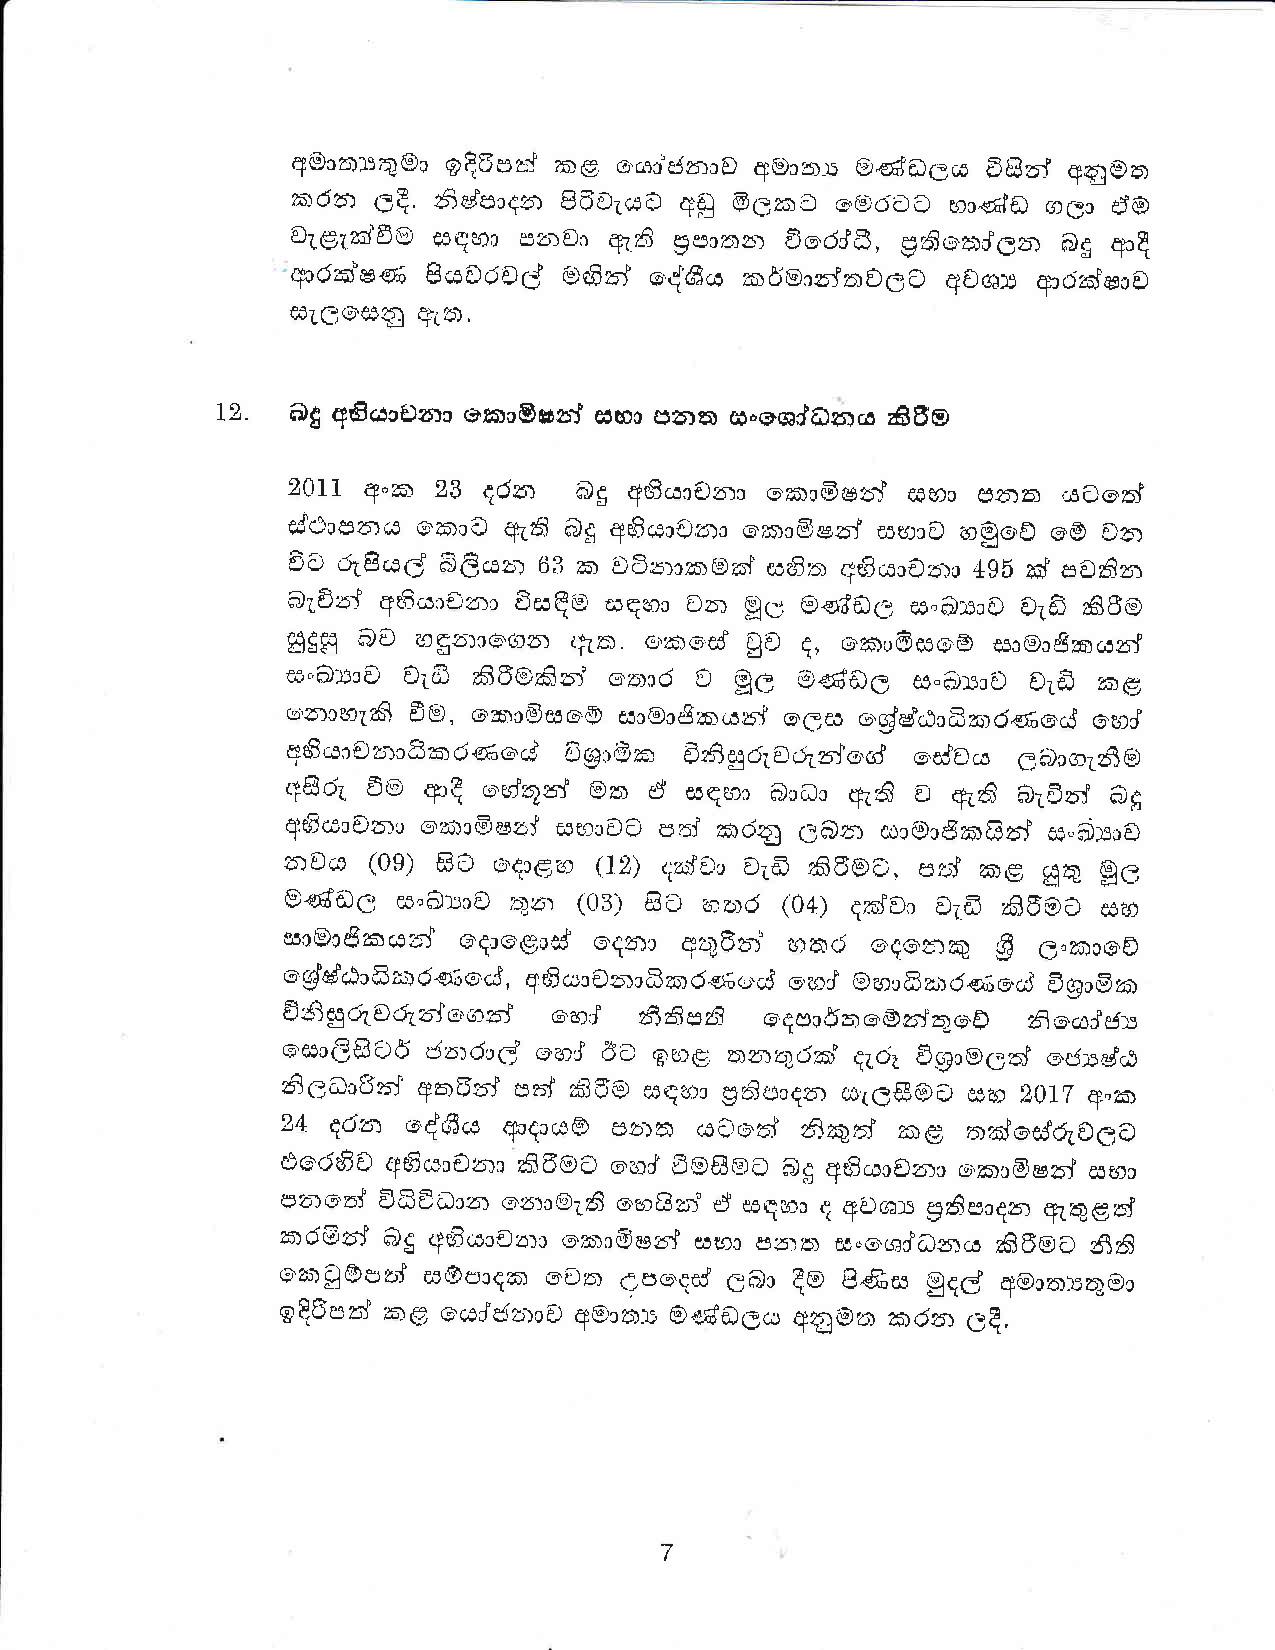 Cabinet Decision on 15.10.2019 page 007